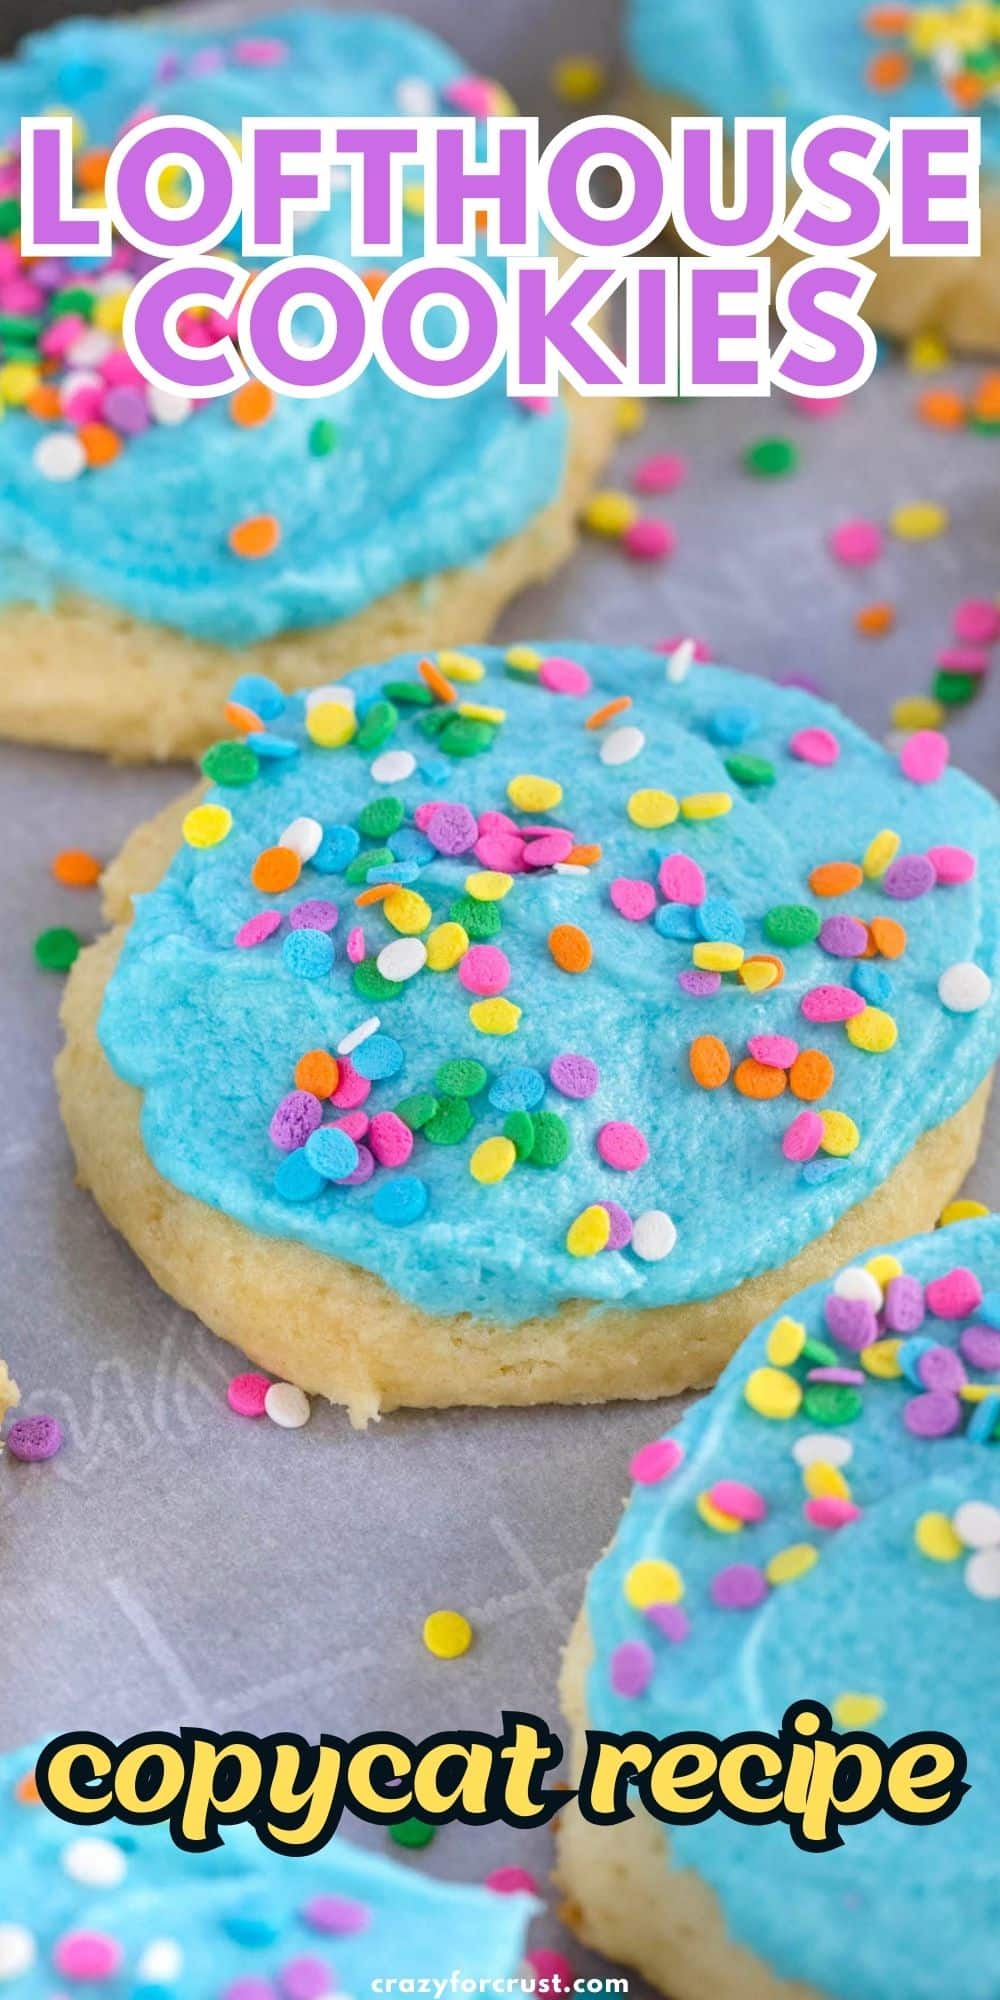 blue frosted cookie with sprinkles and words on photo